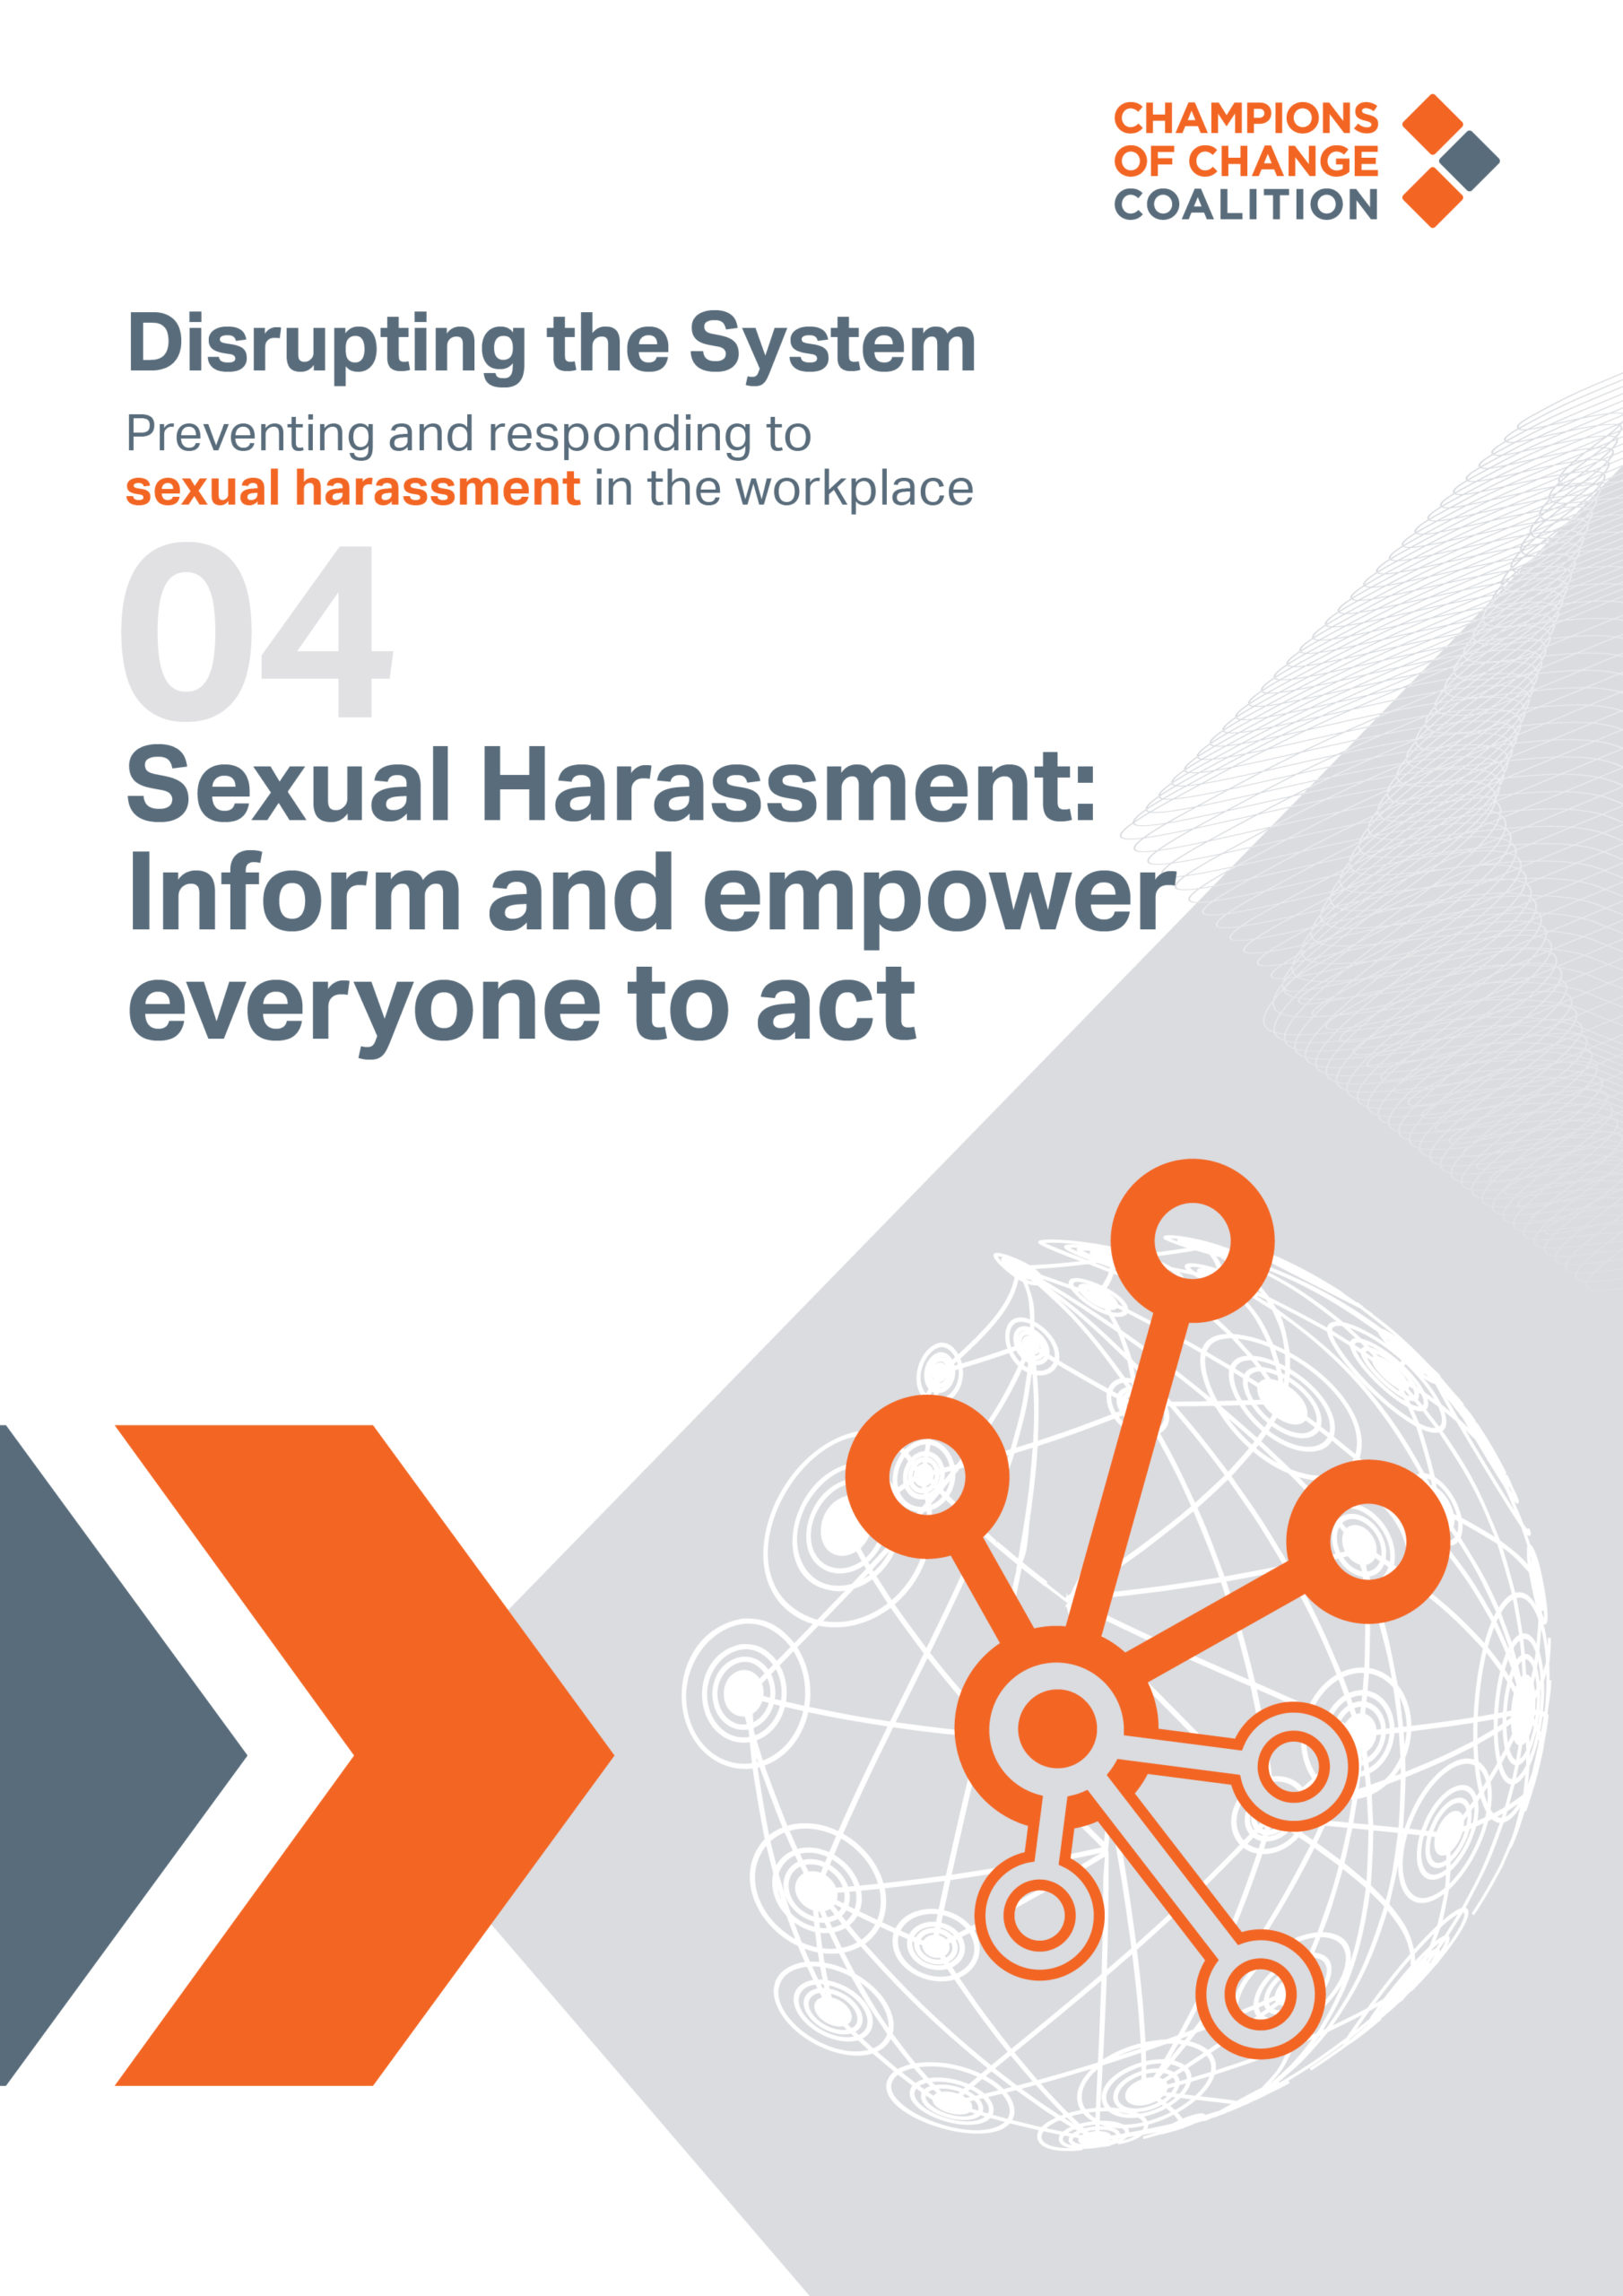 Sexual Harassment inform and empower everyone to act